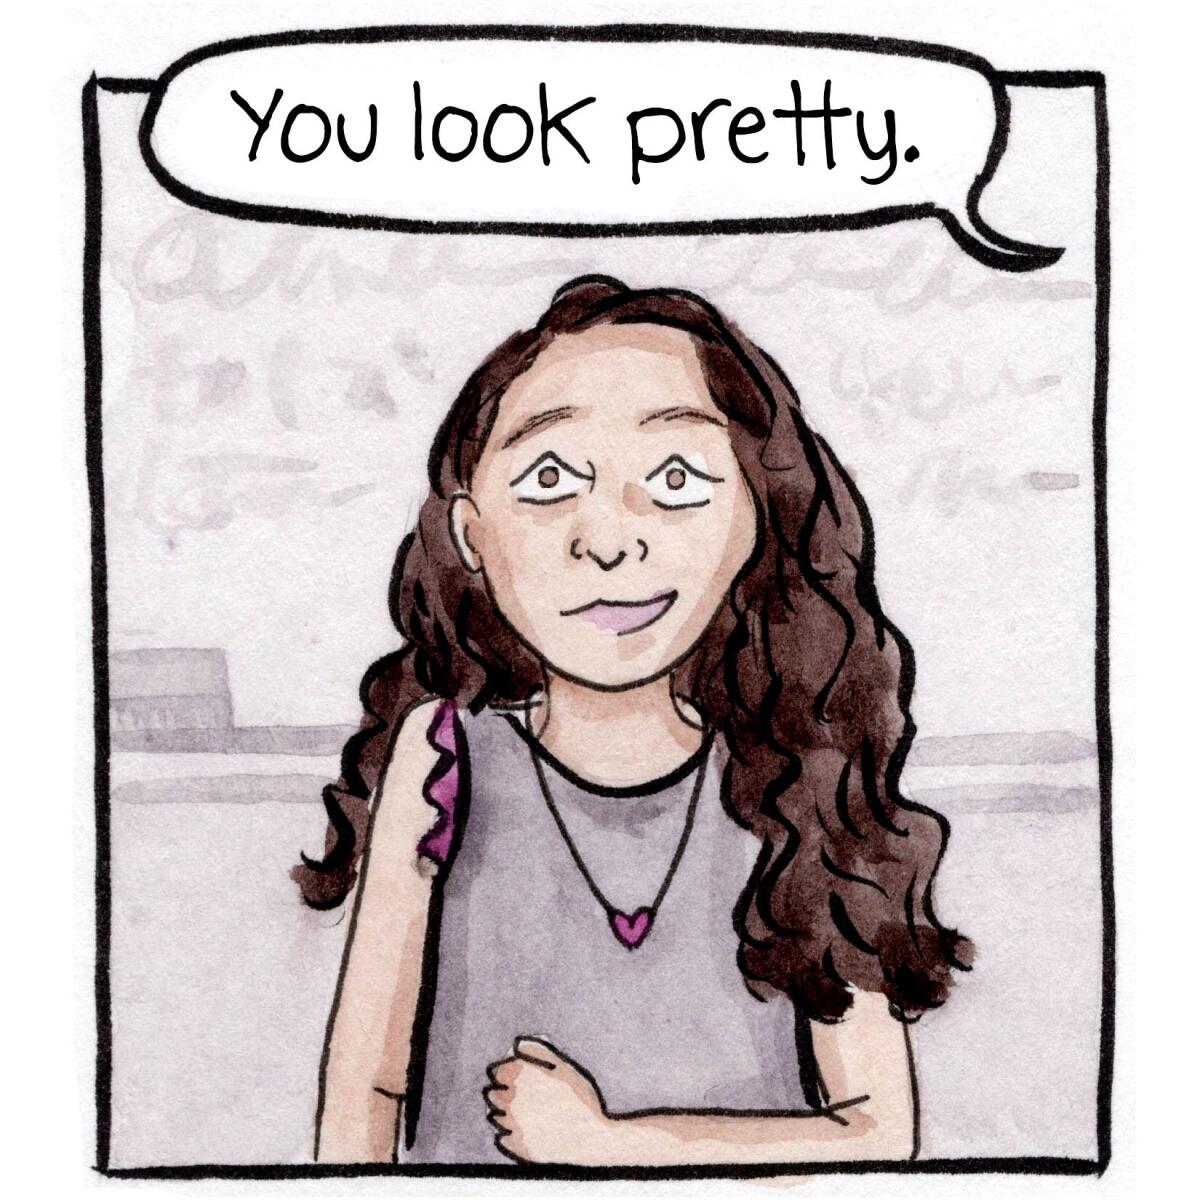 Someone says, "You look pretty," to a teen wearing a ruffled tank top and long wavy hair.